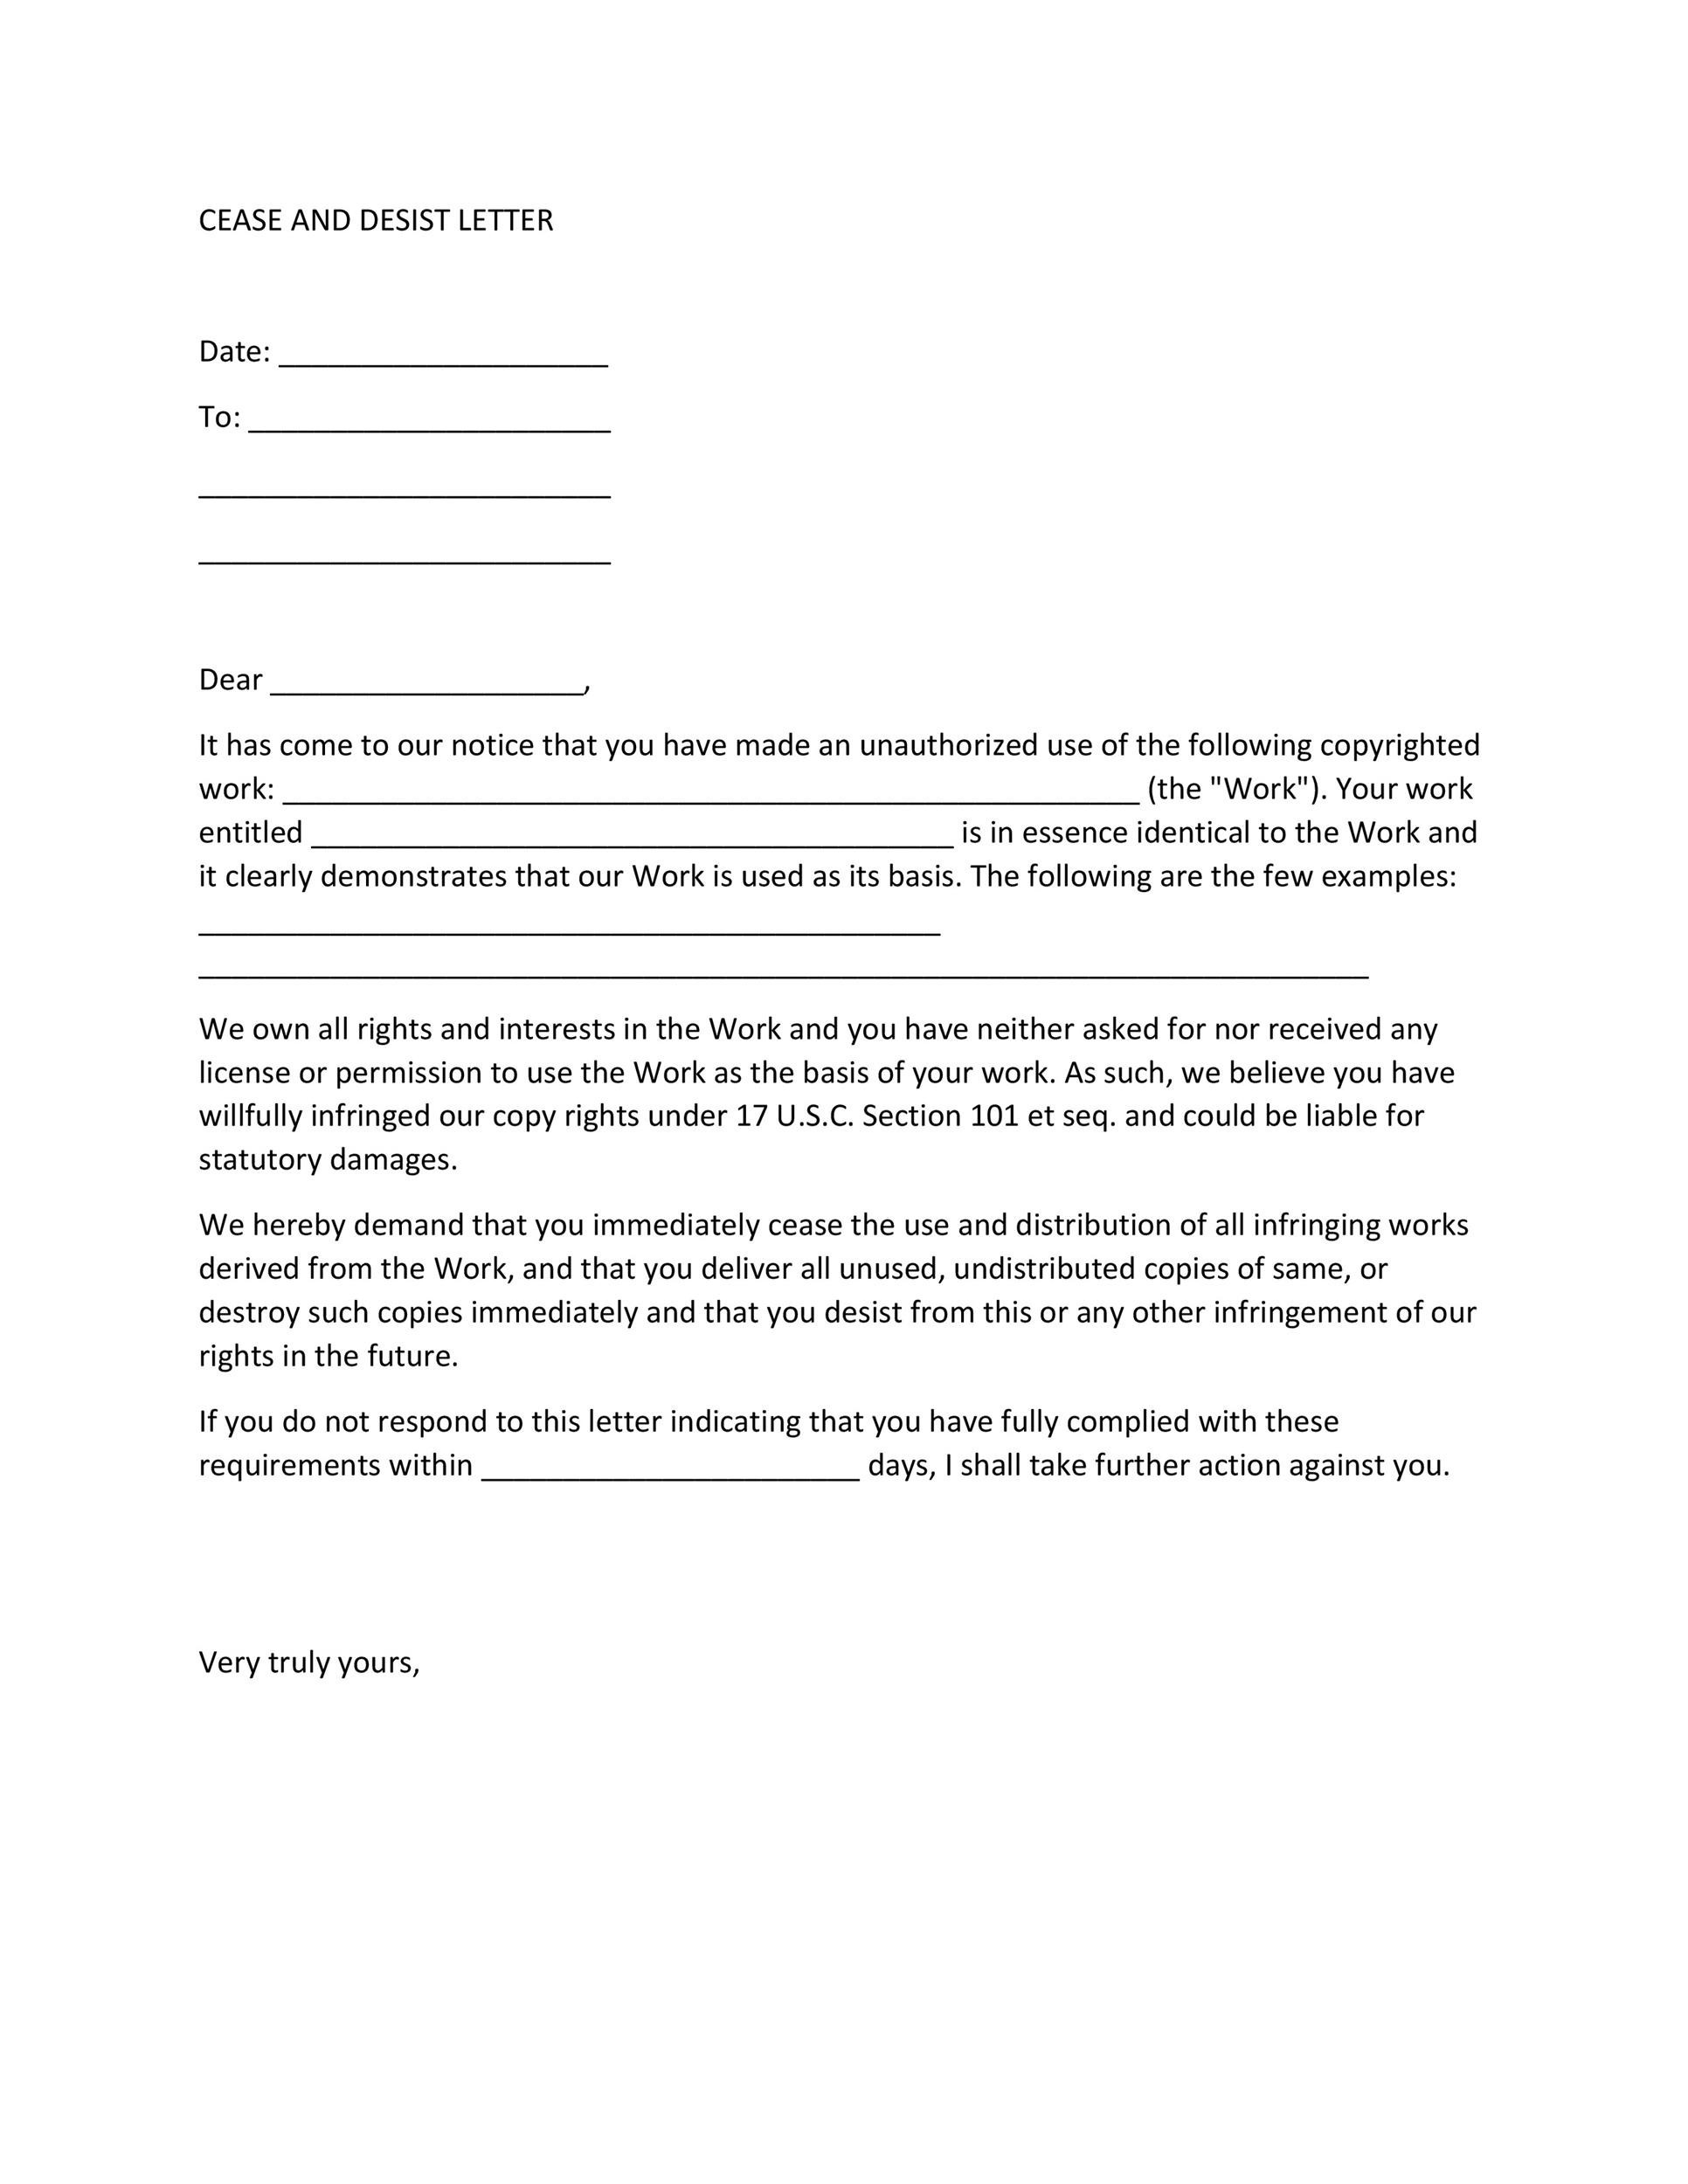 30+ Cease and Desist Letter Templates [FREE] Template Lab